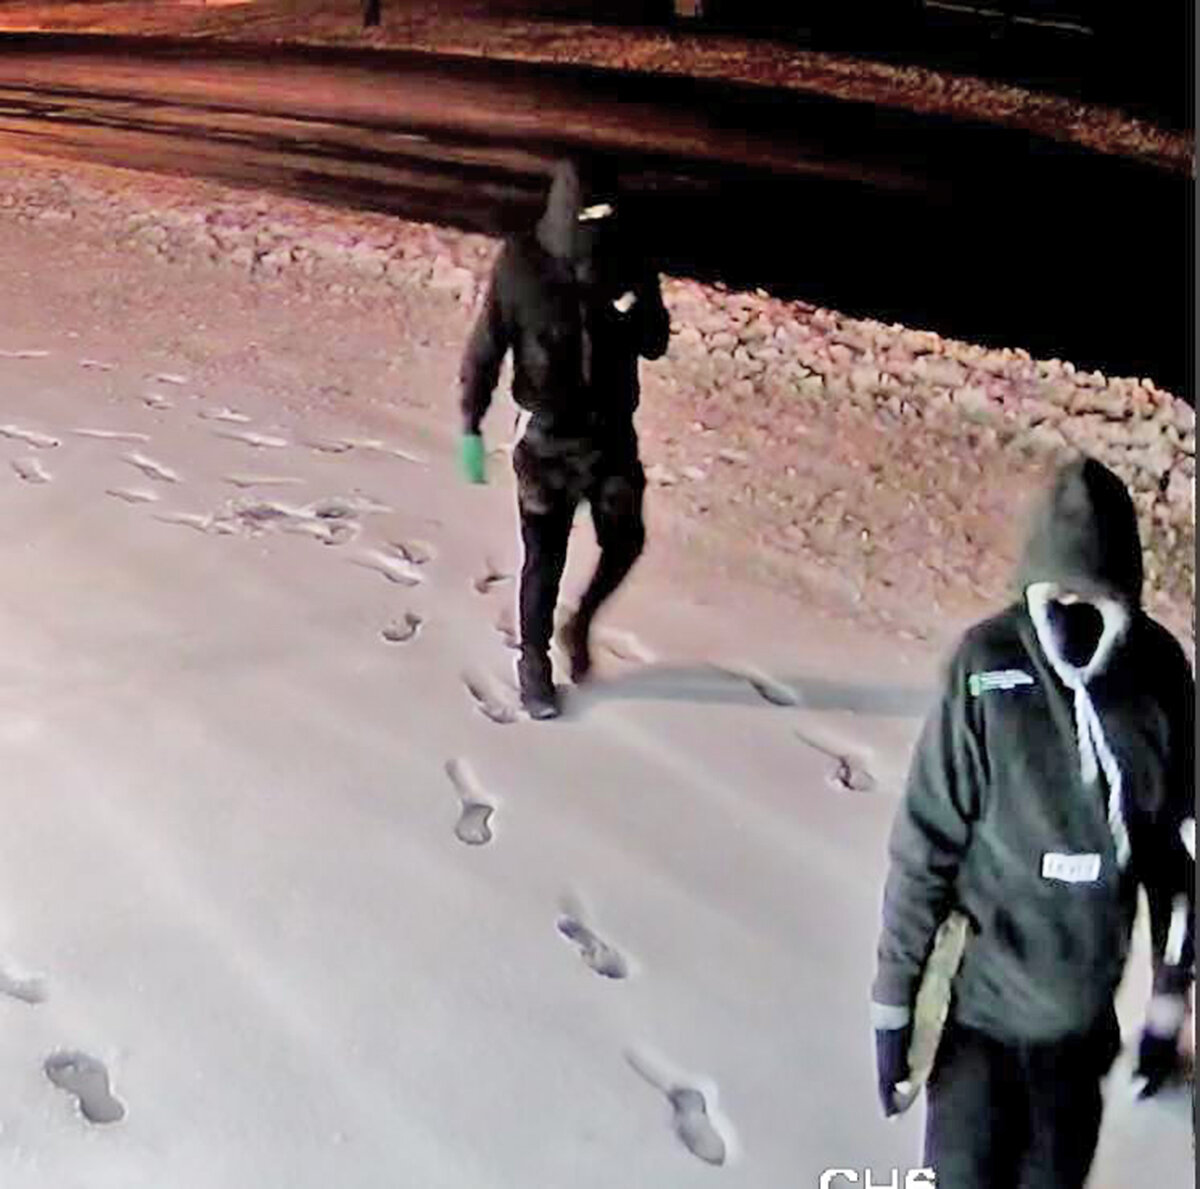 Police are seeking information on these two suspects in connection with an alleged theft from a business on Feb. 23. Anyone who recognizes them is asked to call police at 315-339-7719.